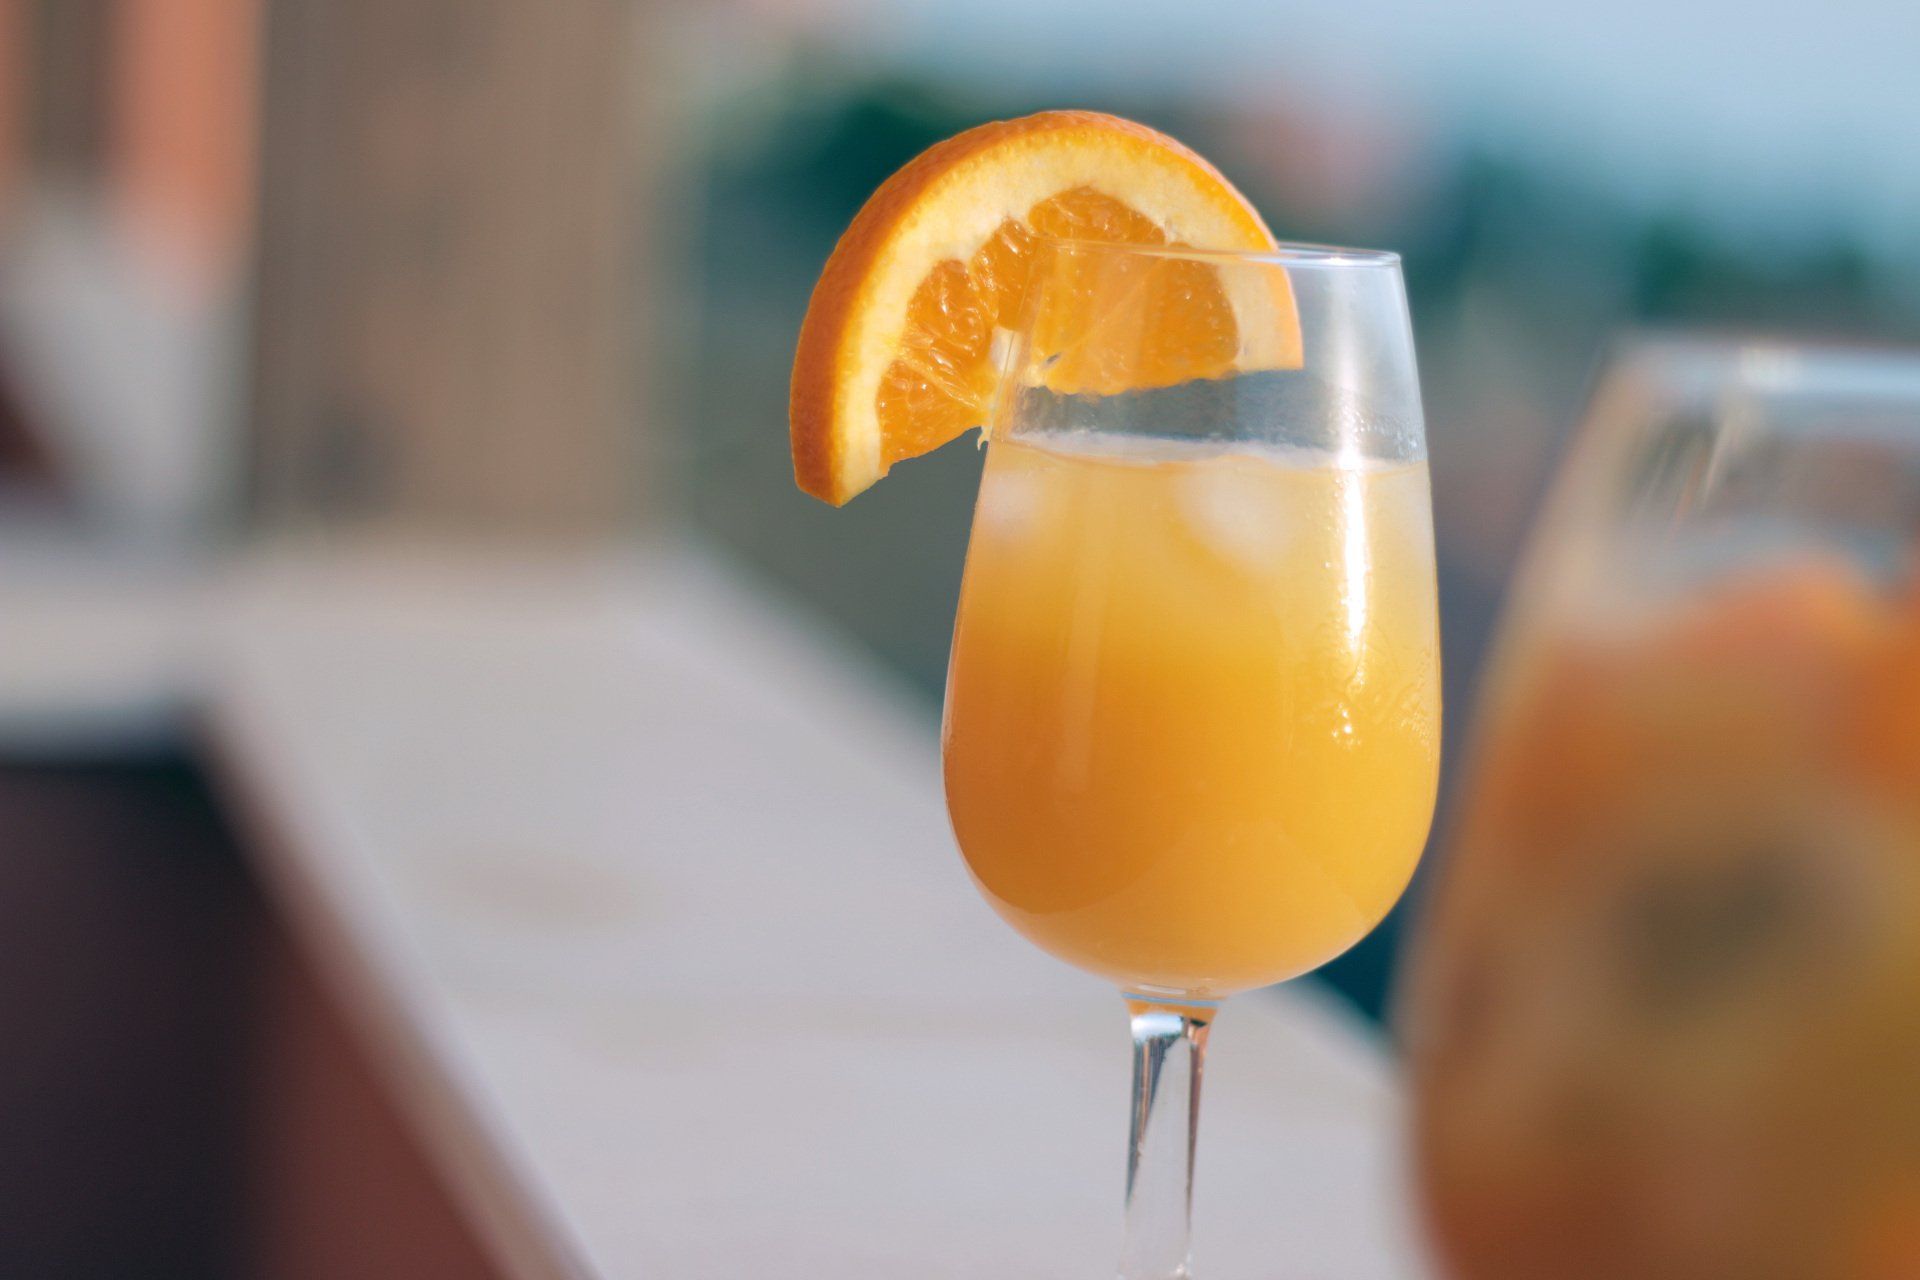 A close up of a glass of orange juice with an orange slice on top.